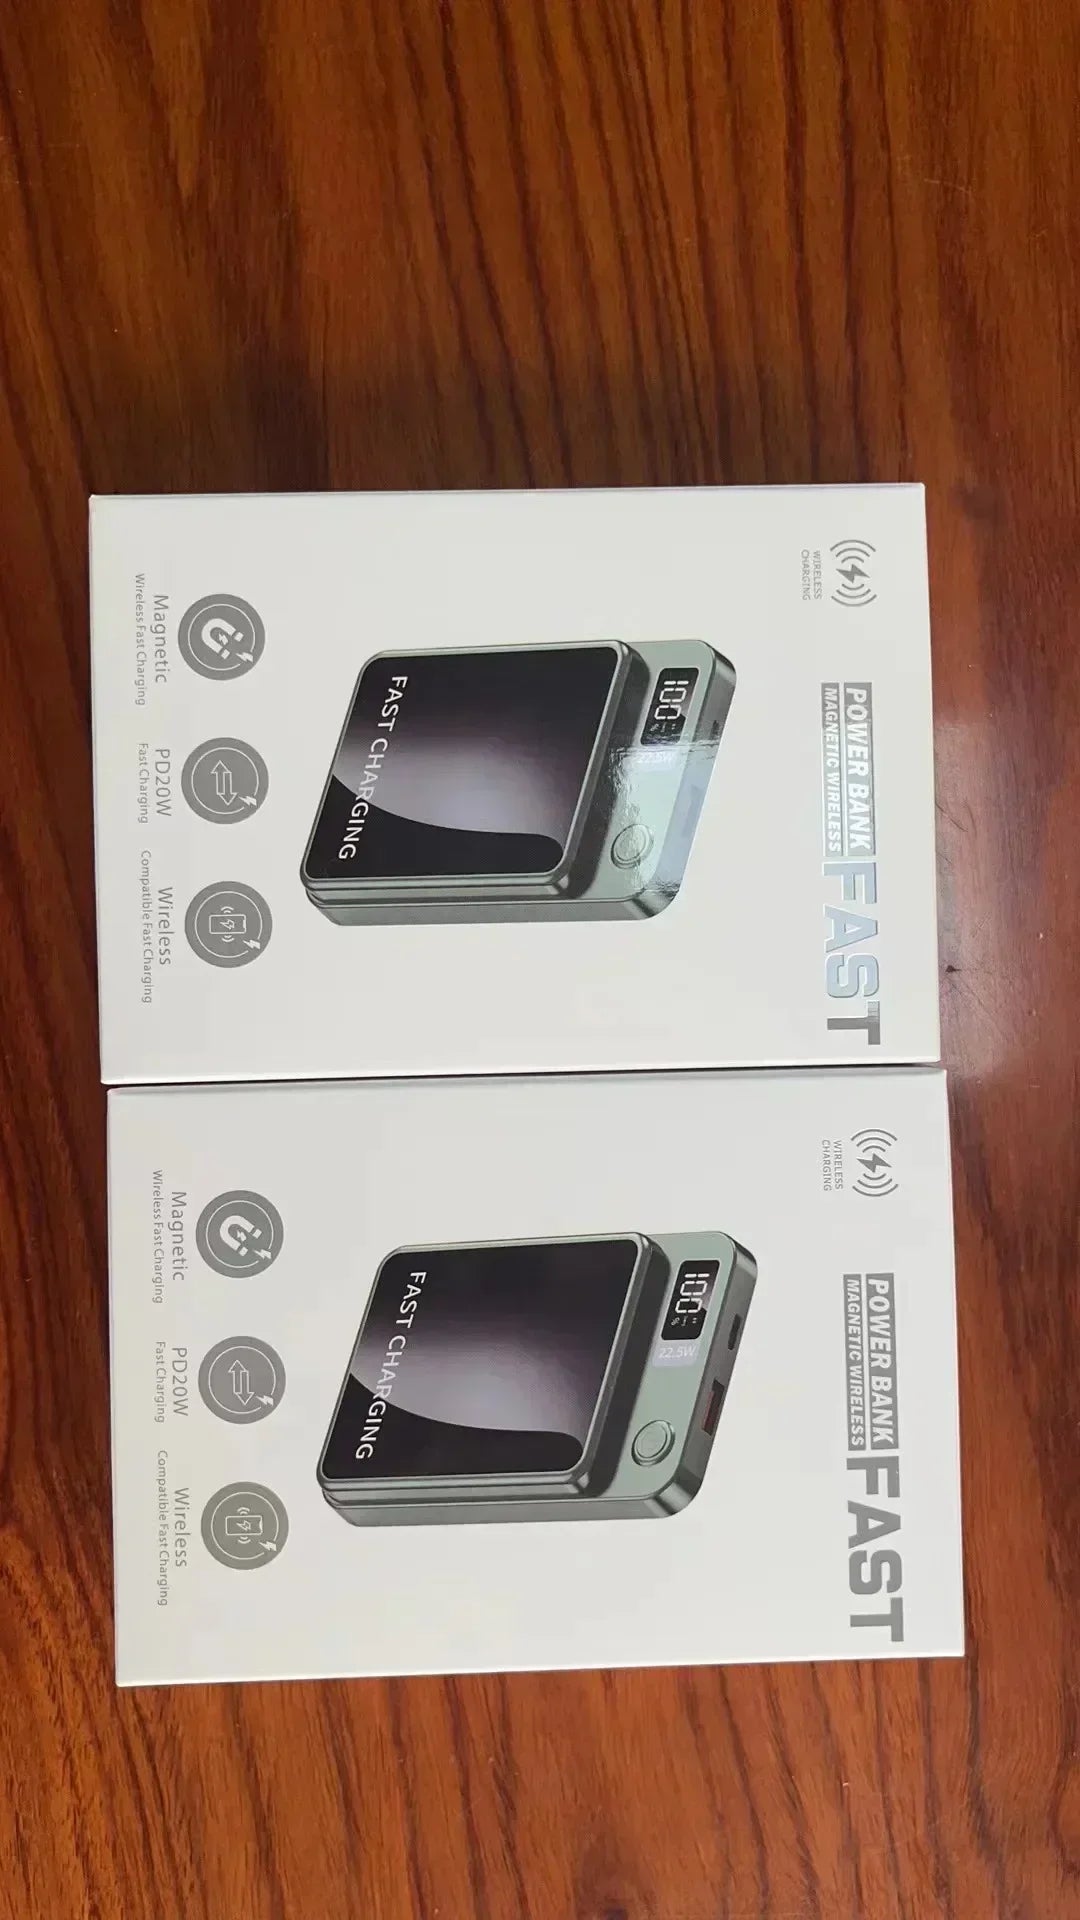 two boxes of the new samsung s3